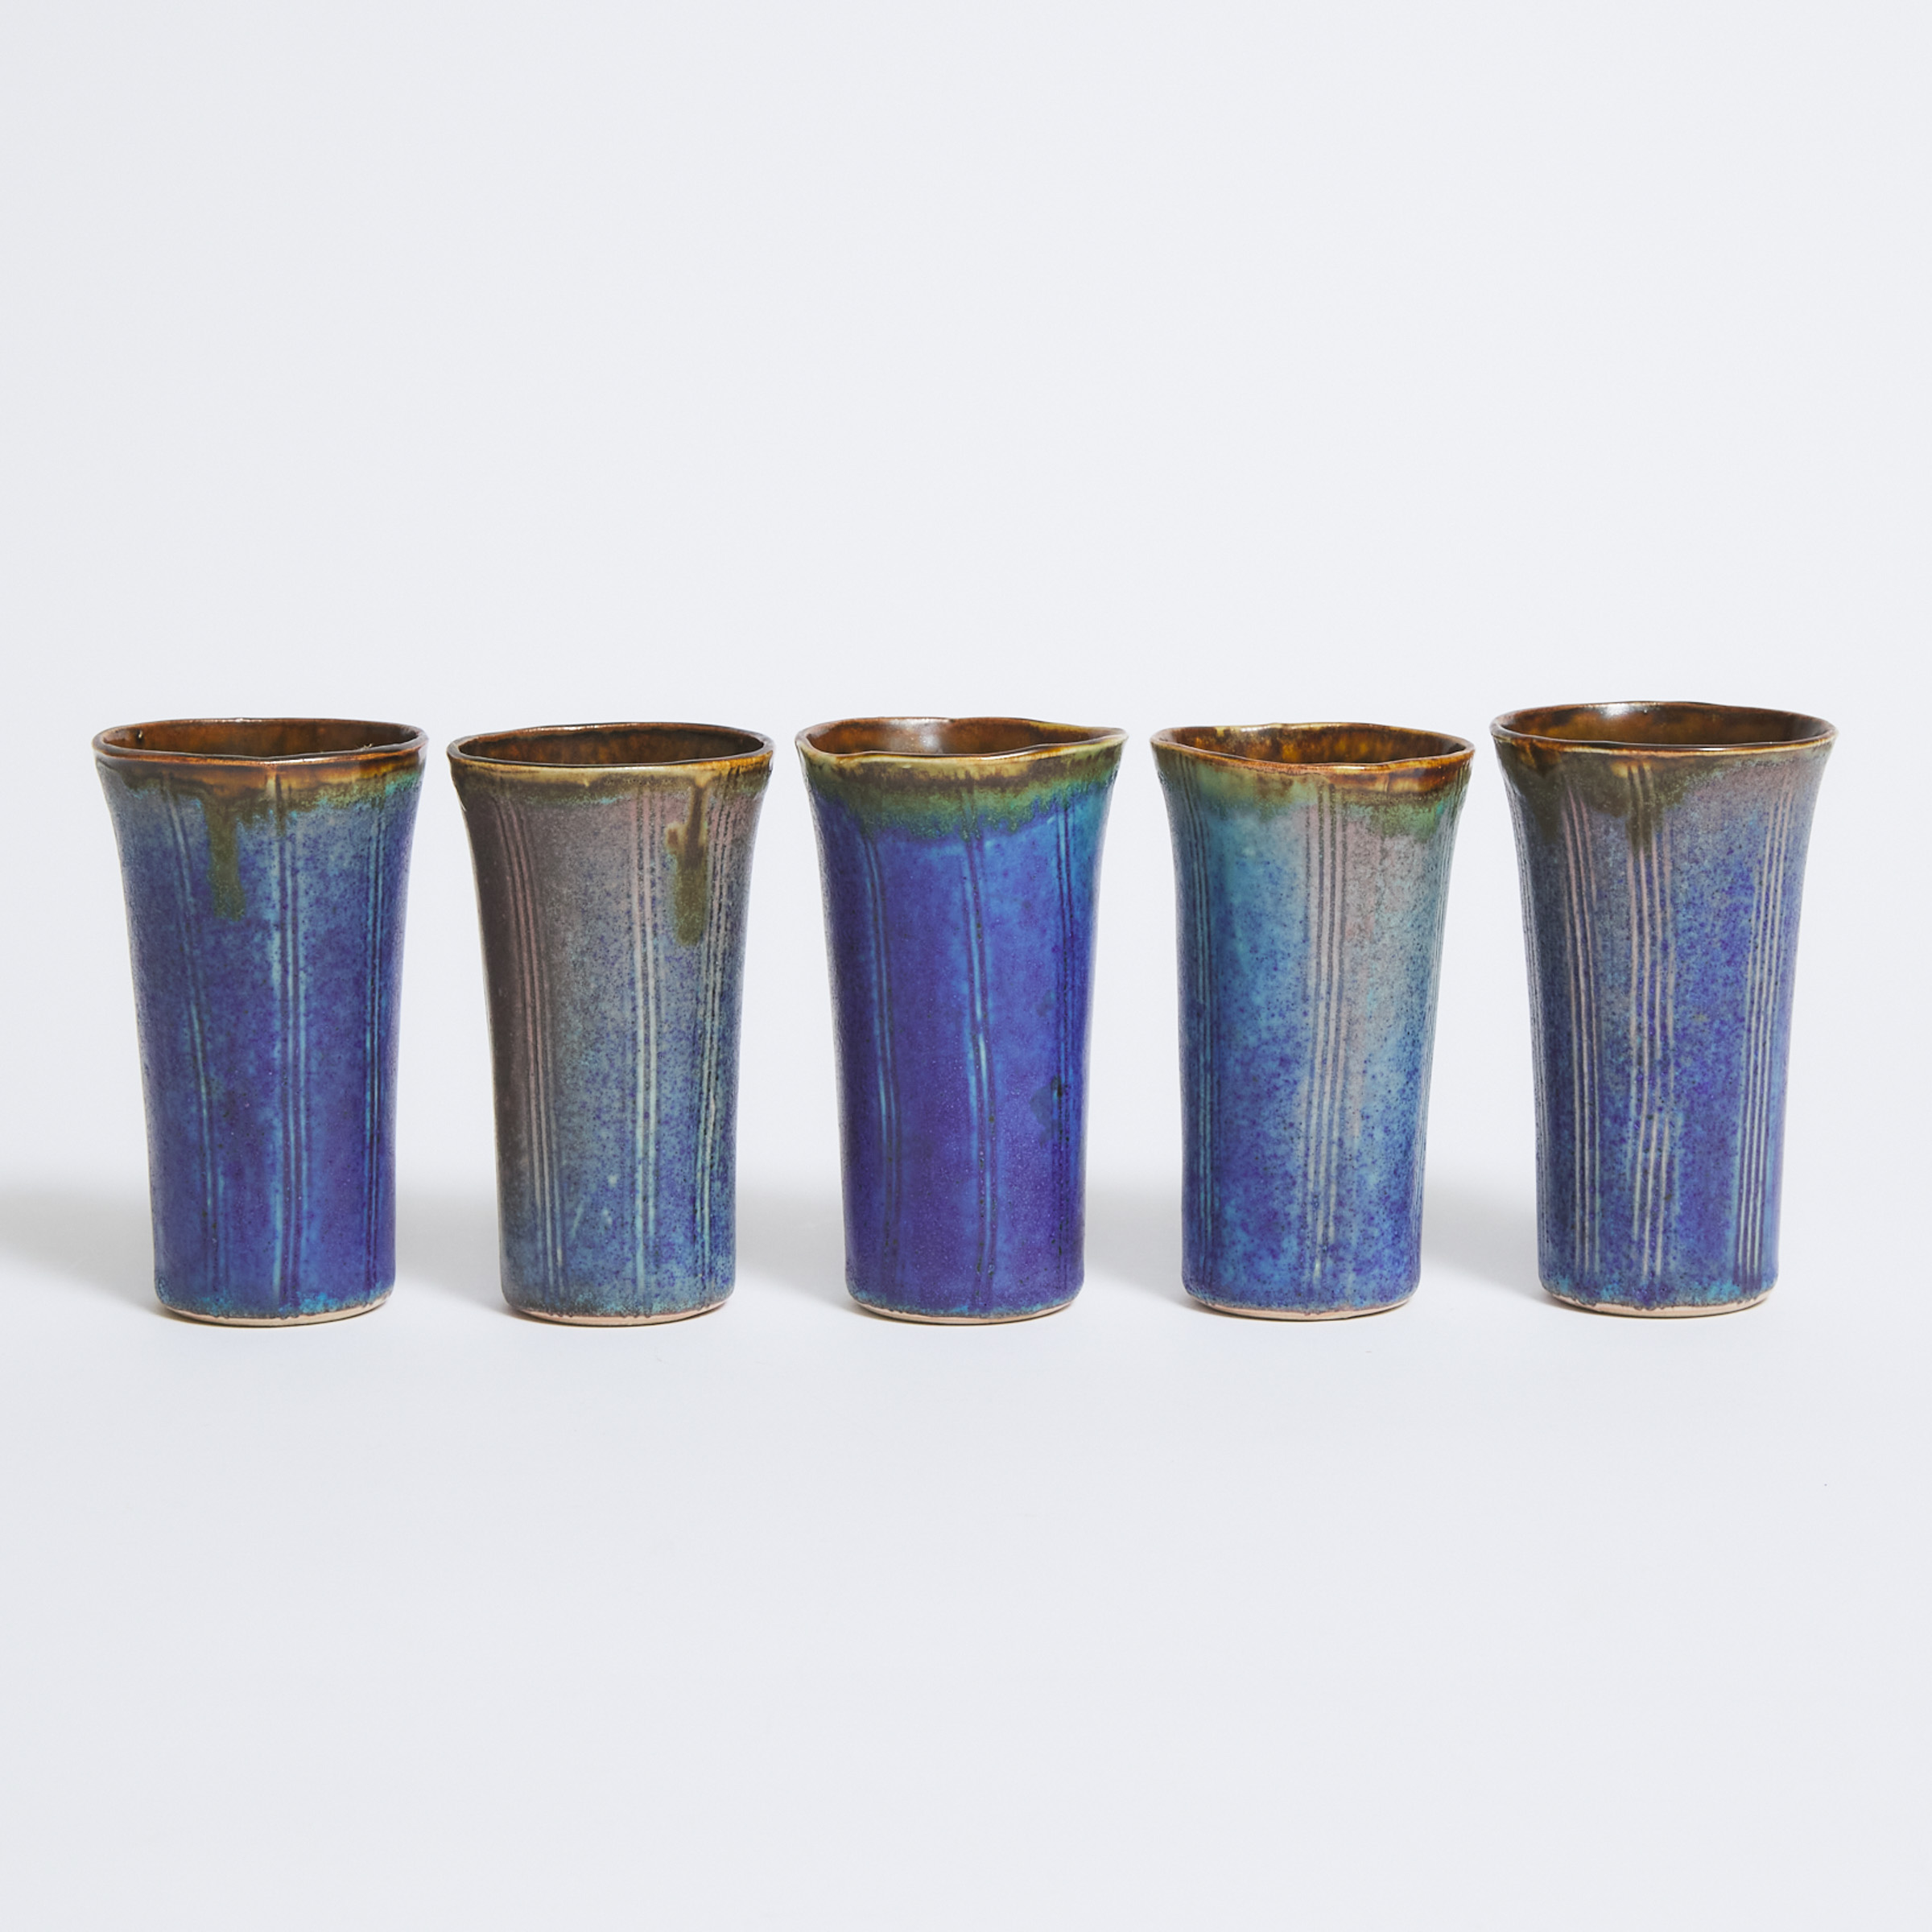 Harlan House (Canadian, b.1943), Five Blue and Brown Glazed Beakers, late 20th century